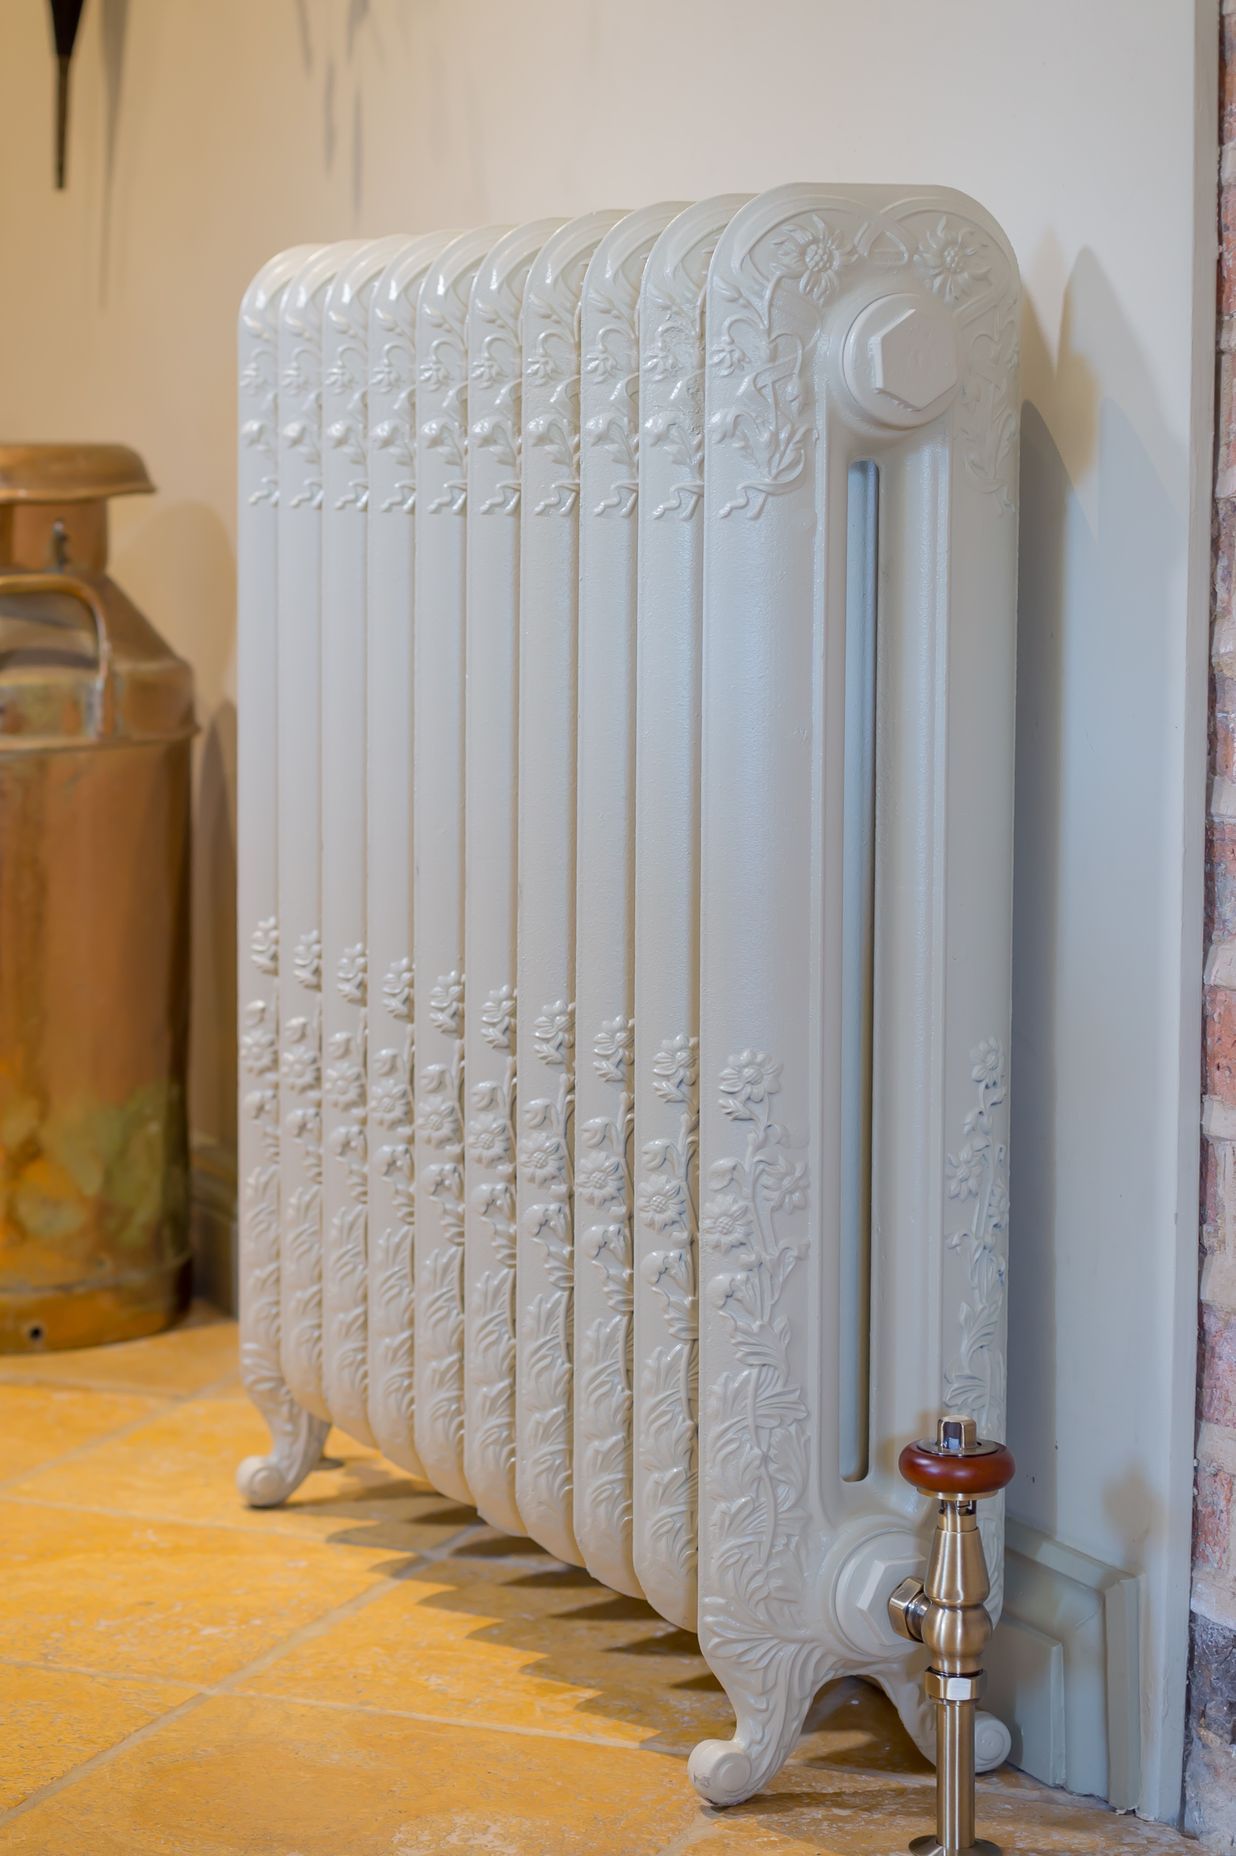 Ideal for heritage homes, Paladin cast iron radiators are carefully hand built and finished to your requirements. Available exclusively from Warm NZ.